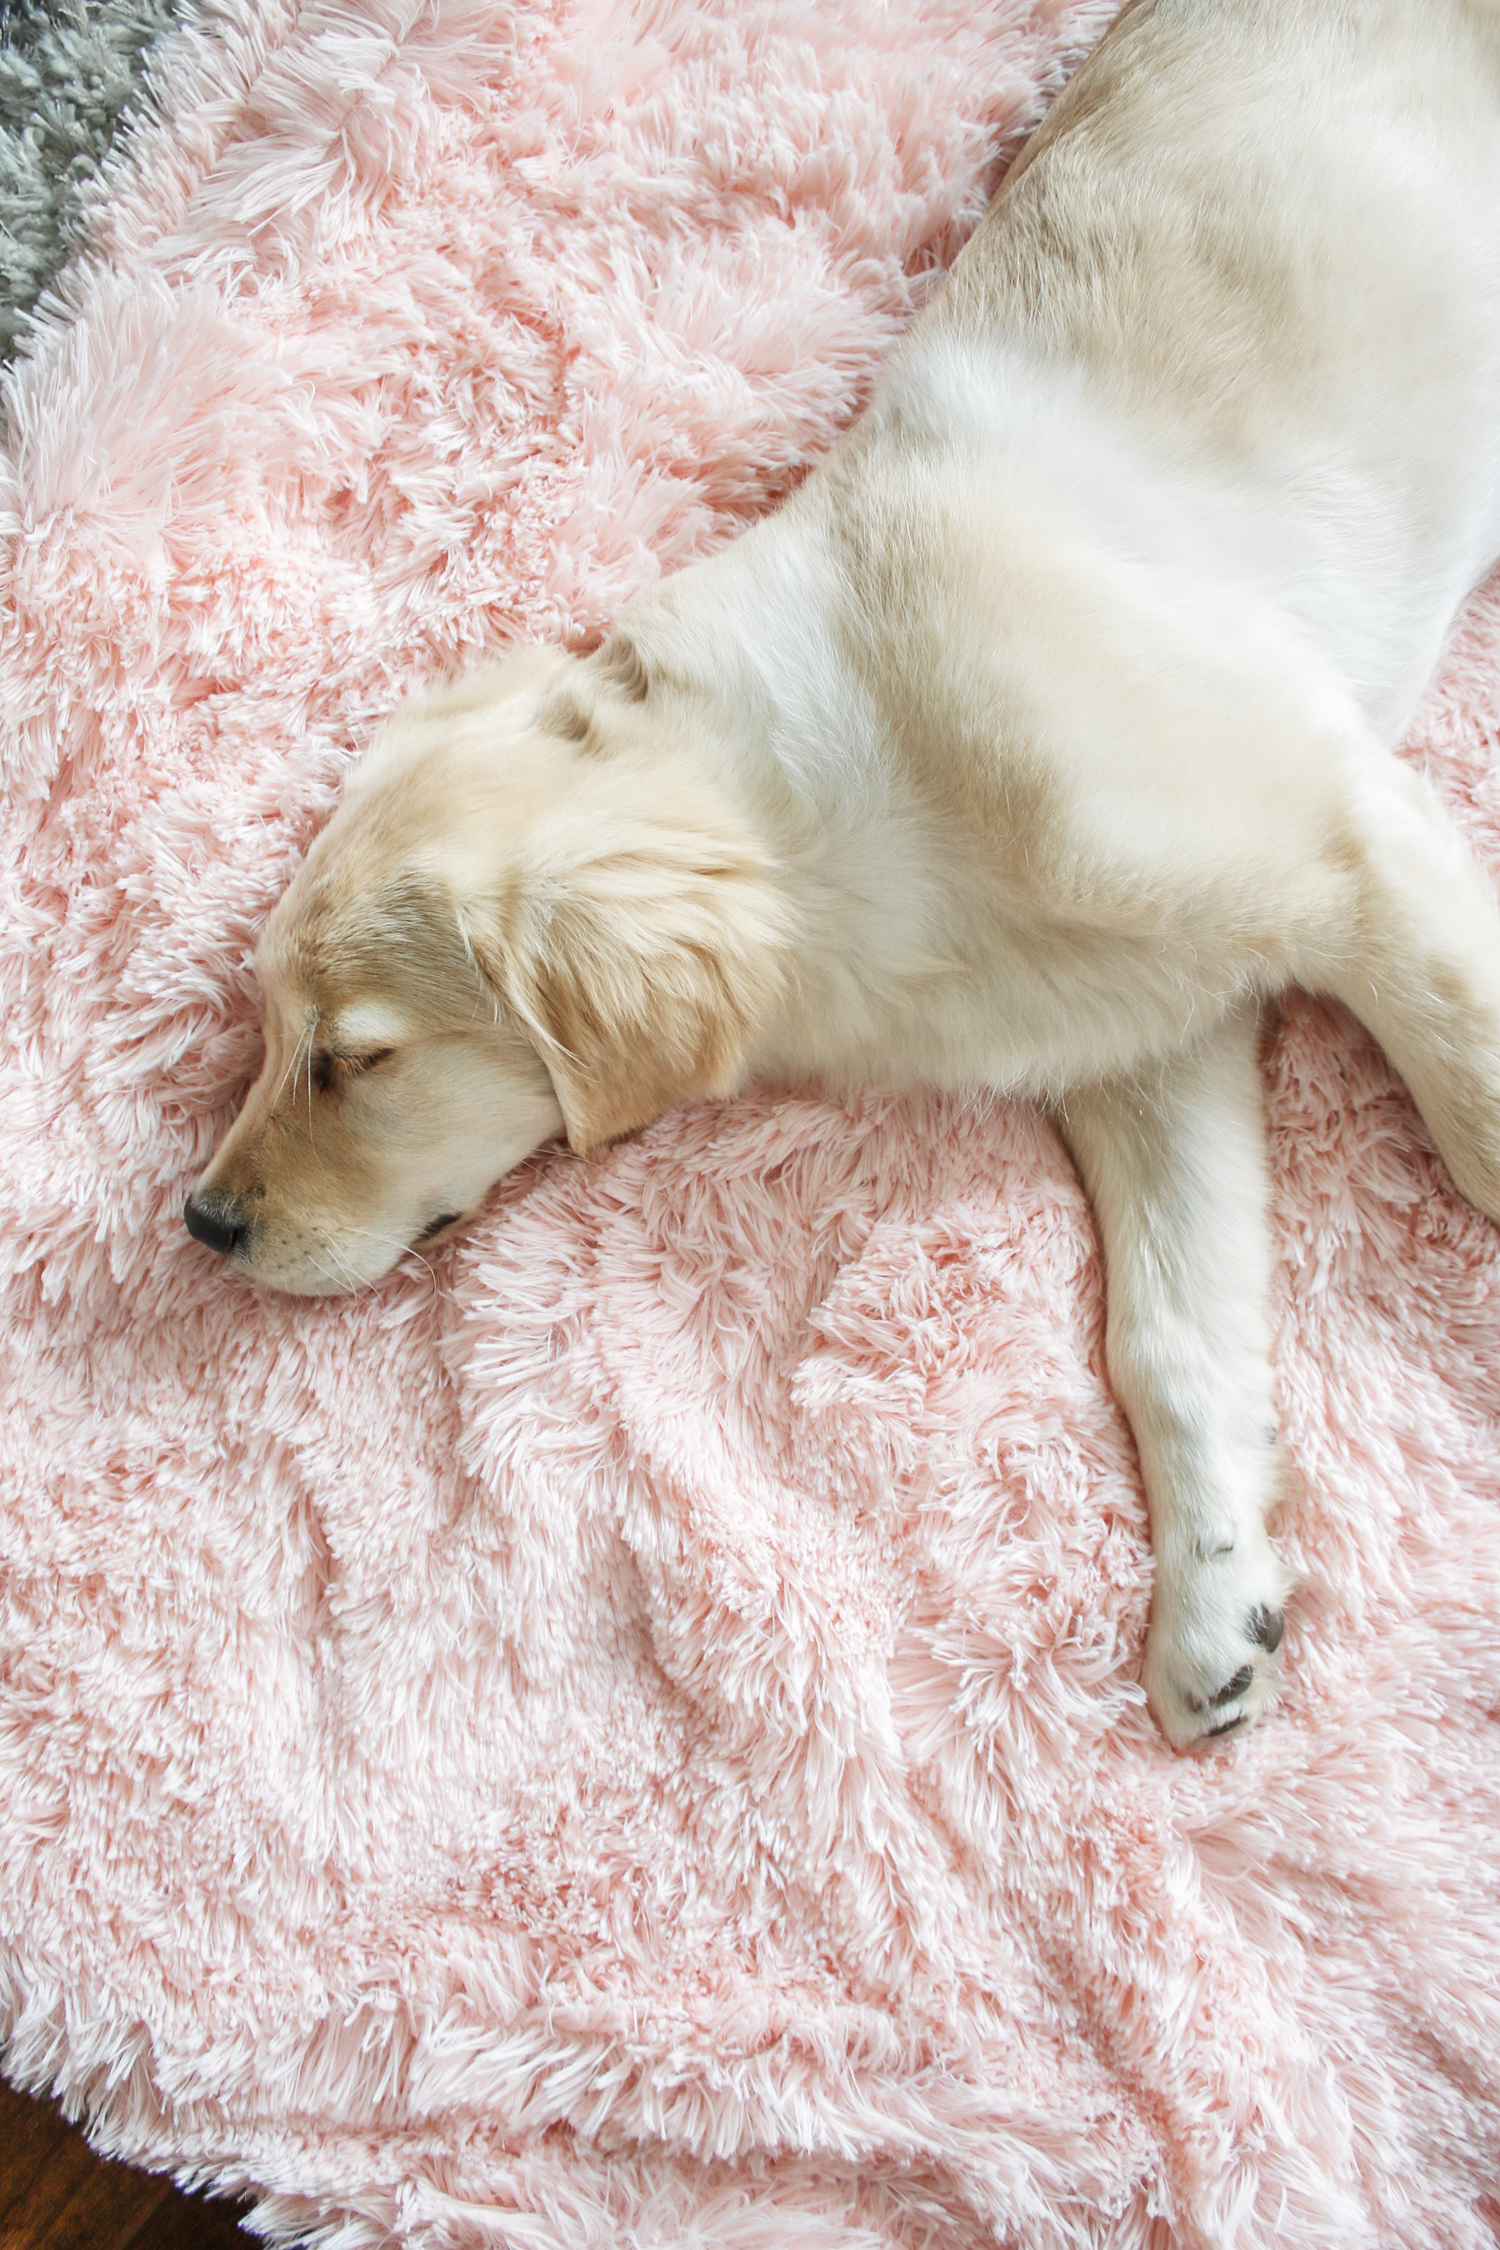 Woman's Best Friend: 8 Reasons to Get a Puppy by southern lifestyle blogger Stephanie Ziajka from Diary of a Debutante, how a new golden retriever puppy can help if you're depressed in a new city, 8 reasons to get a puppy, 8 reasons why you should get a dog, 4 month old golden retriever puppy pictures